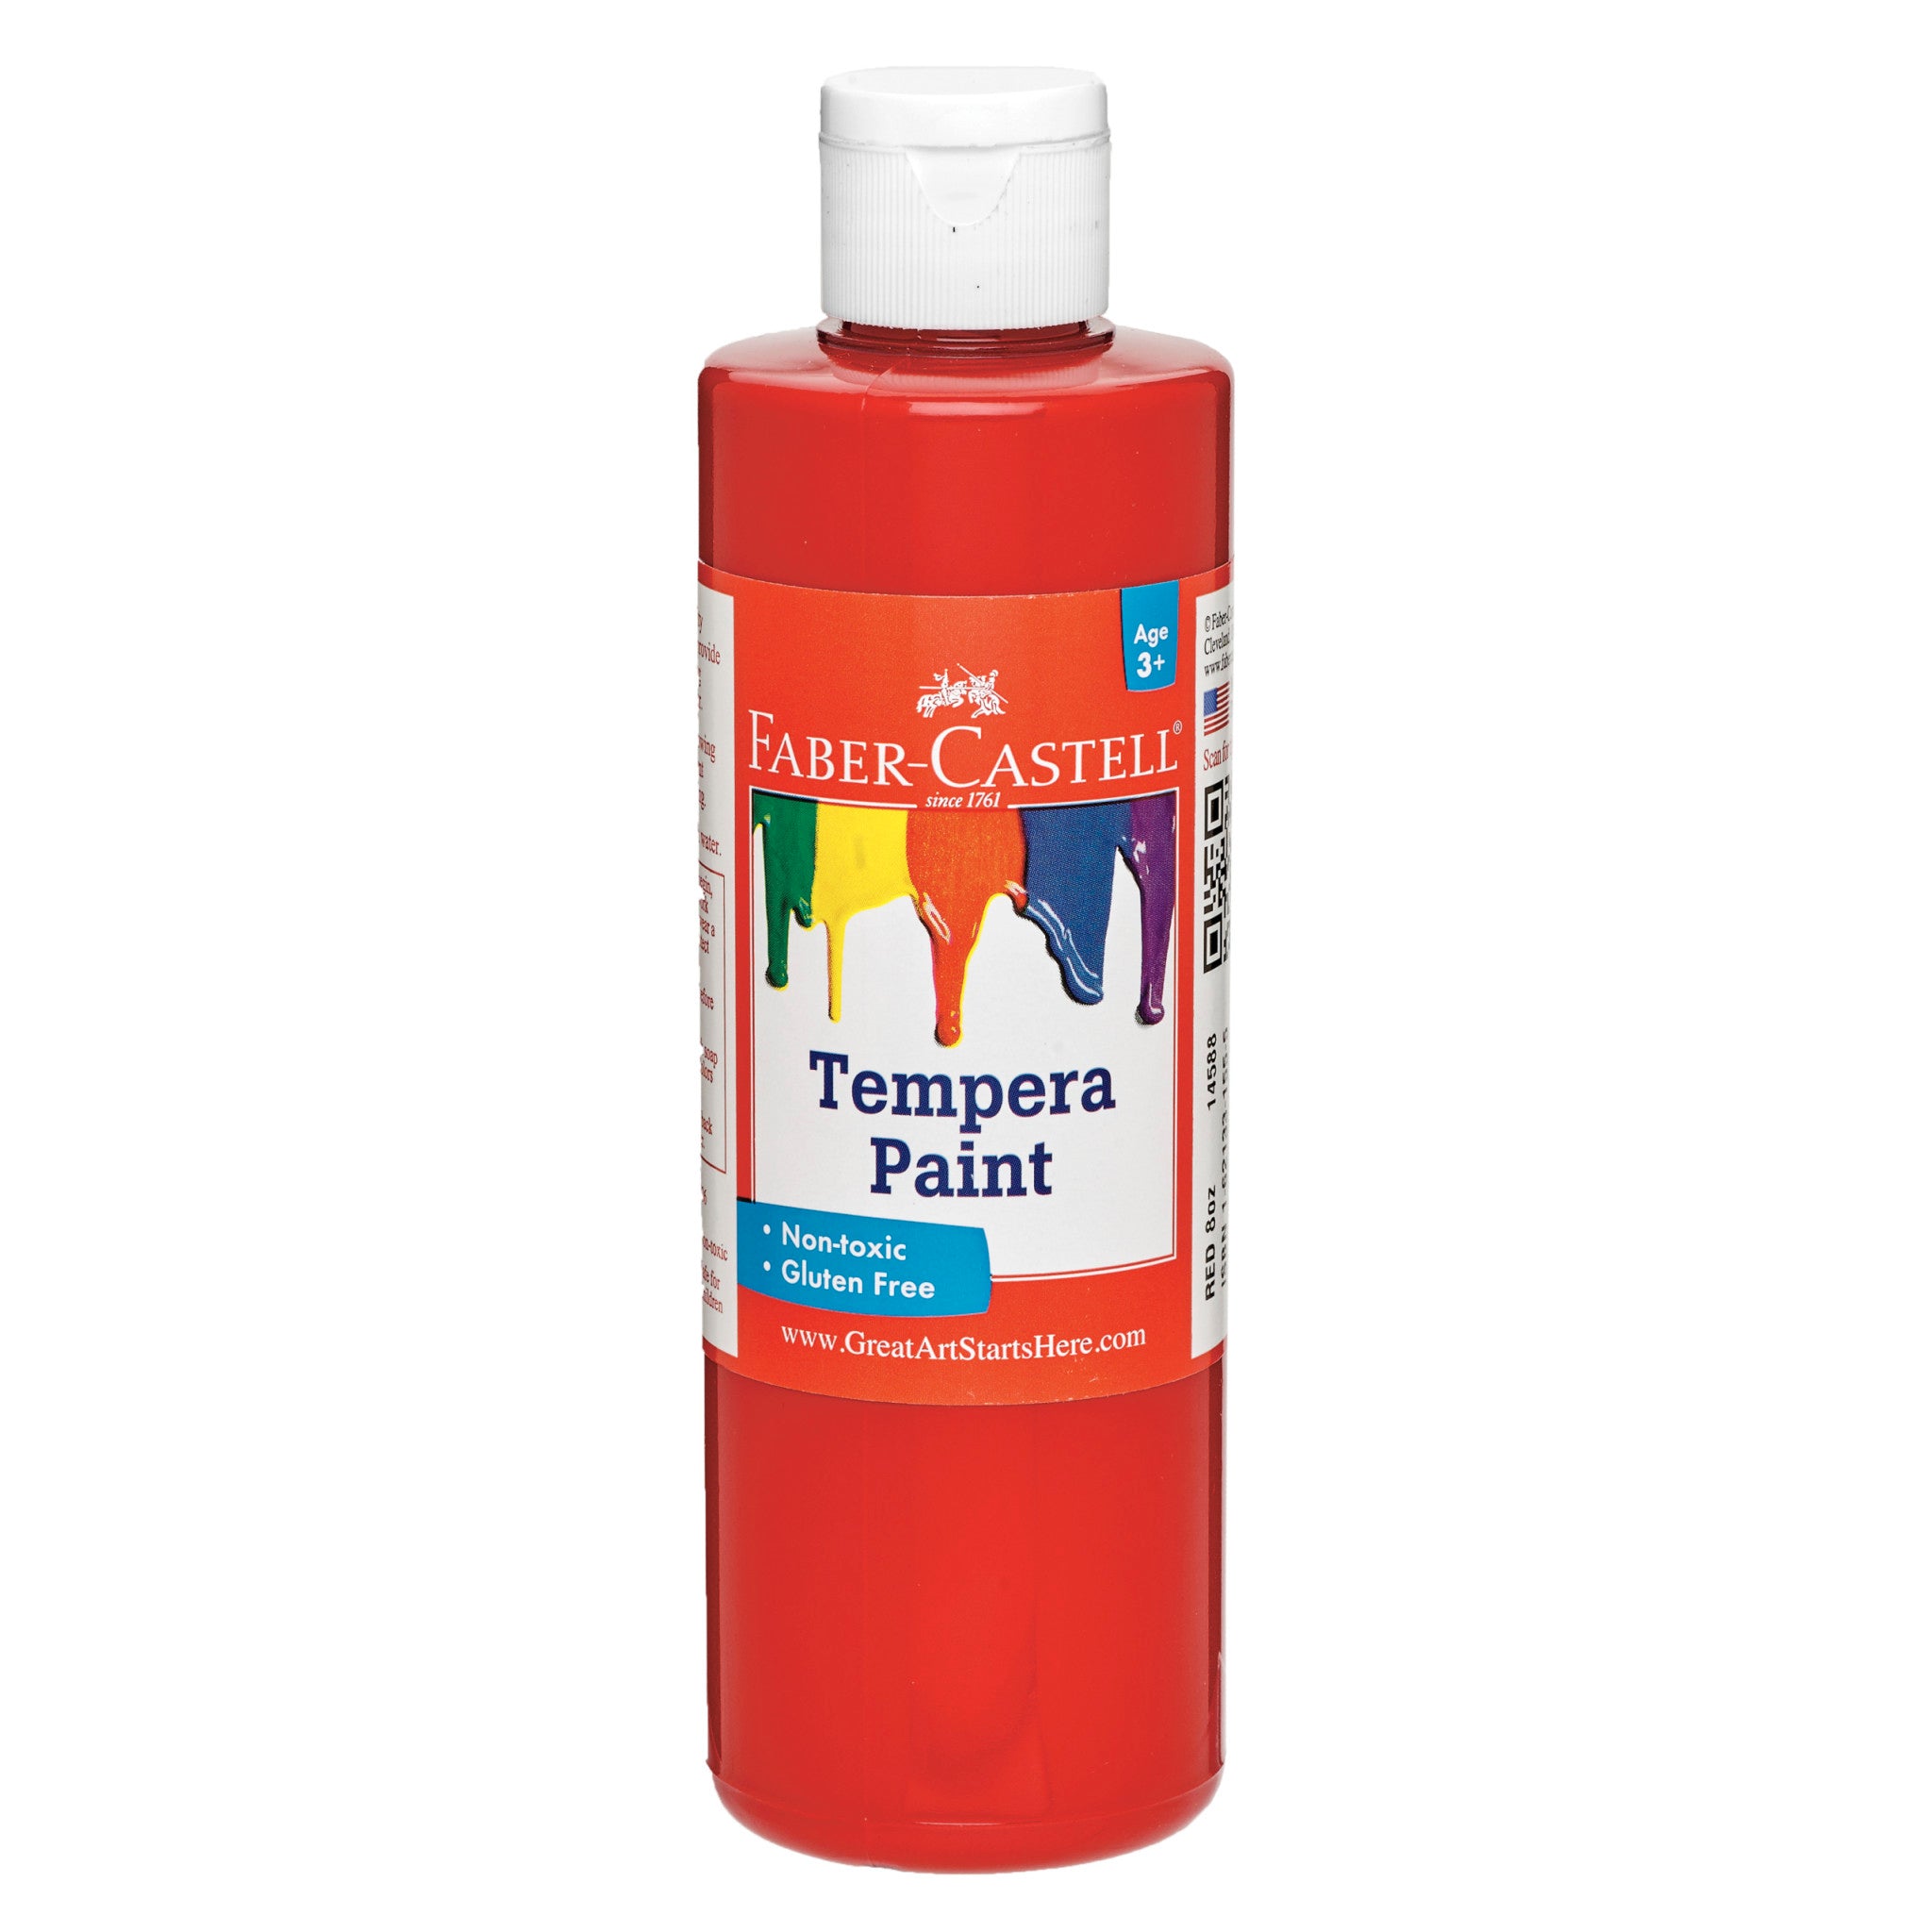 Faber-Castell Tempera Paint 8 oz Red